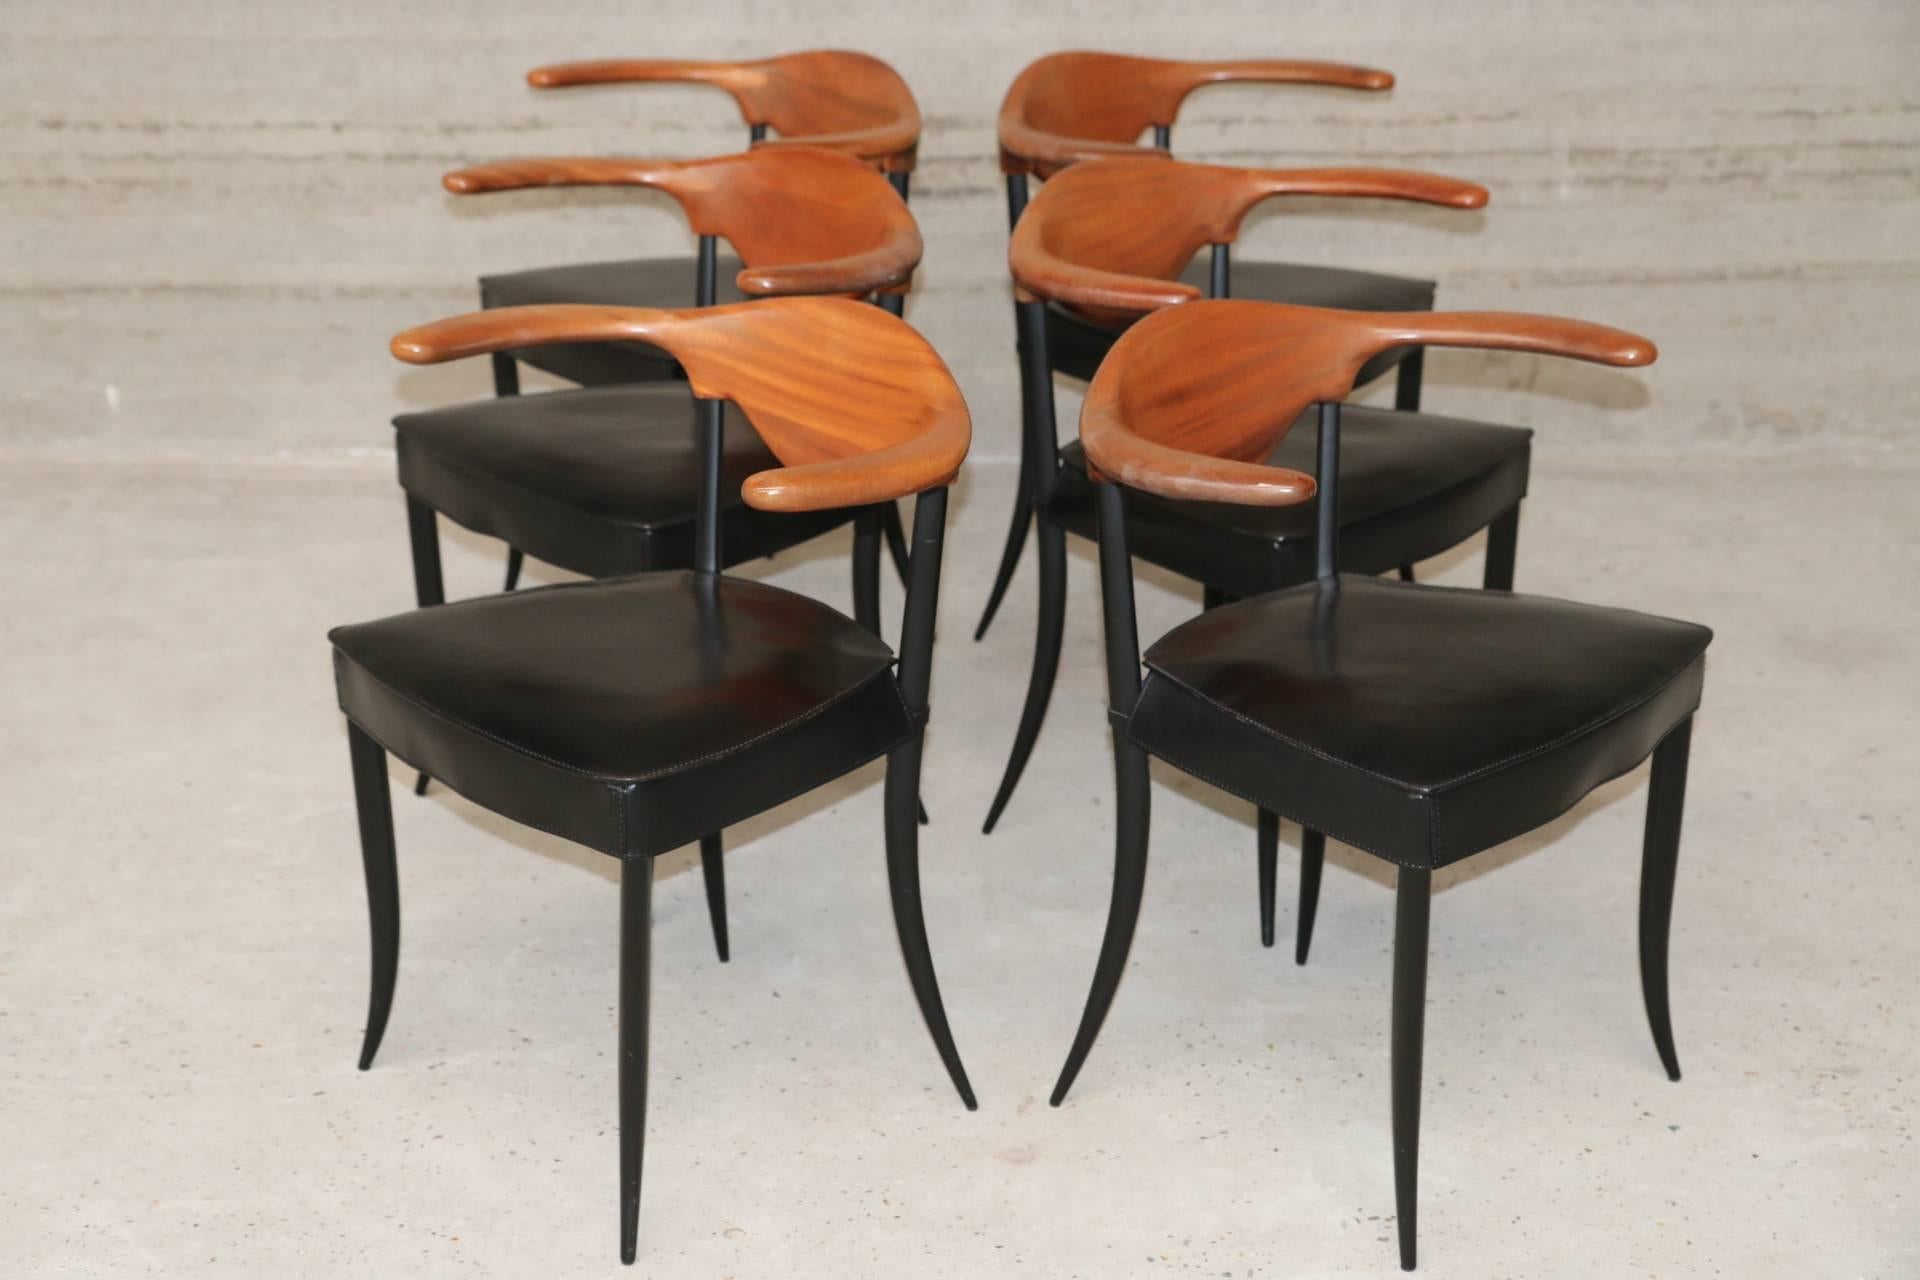 Impressive glass table with wooden base and six cowhorn chairs, Italy 1